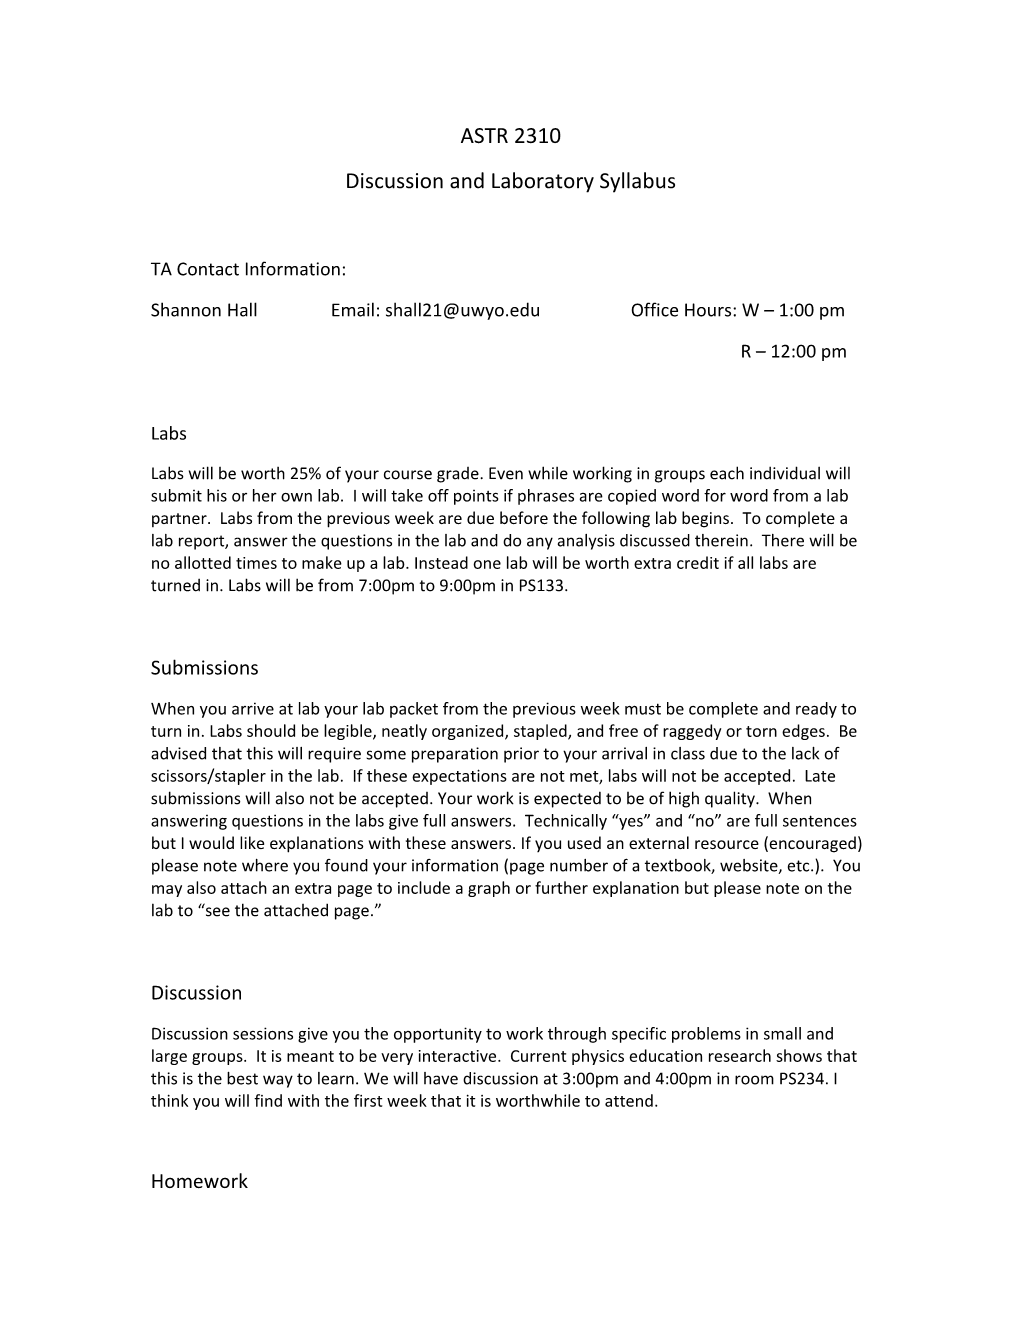 Discussion and Laboratory Syllabus